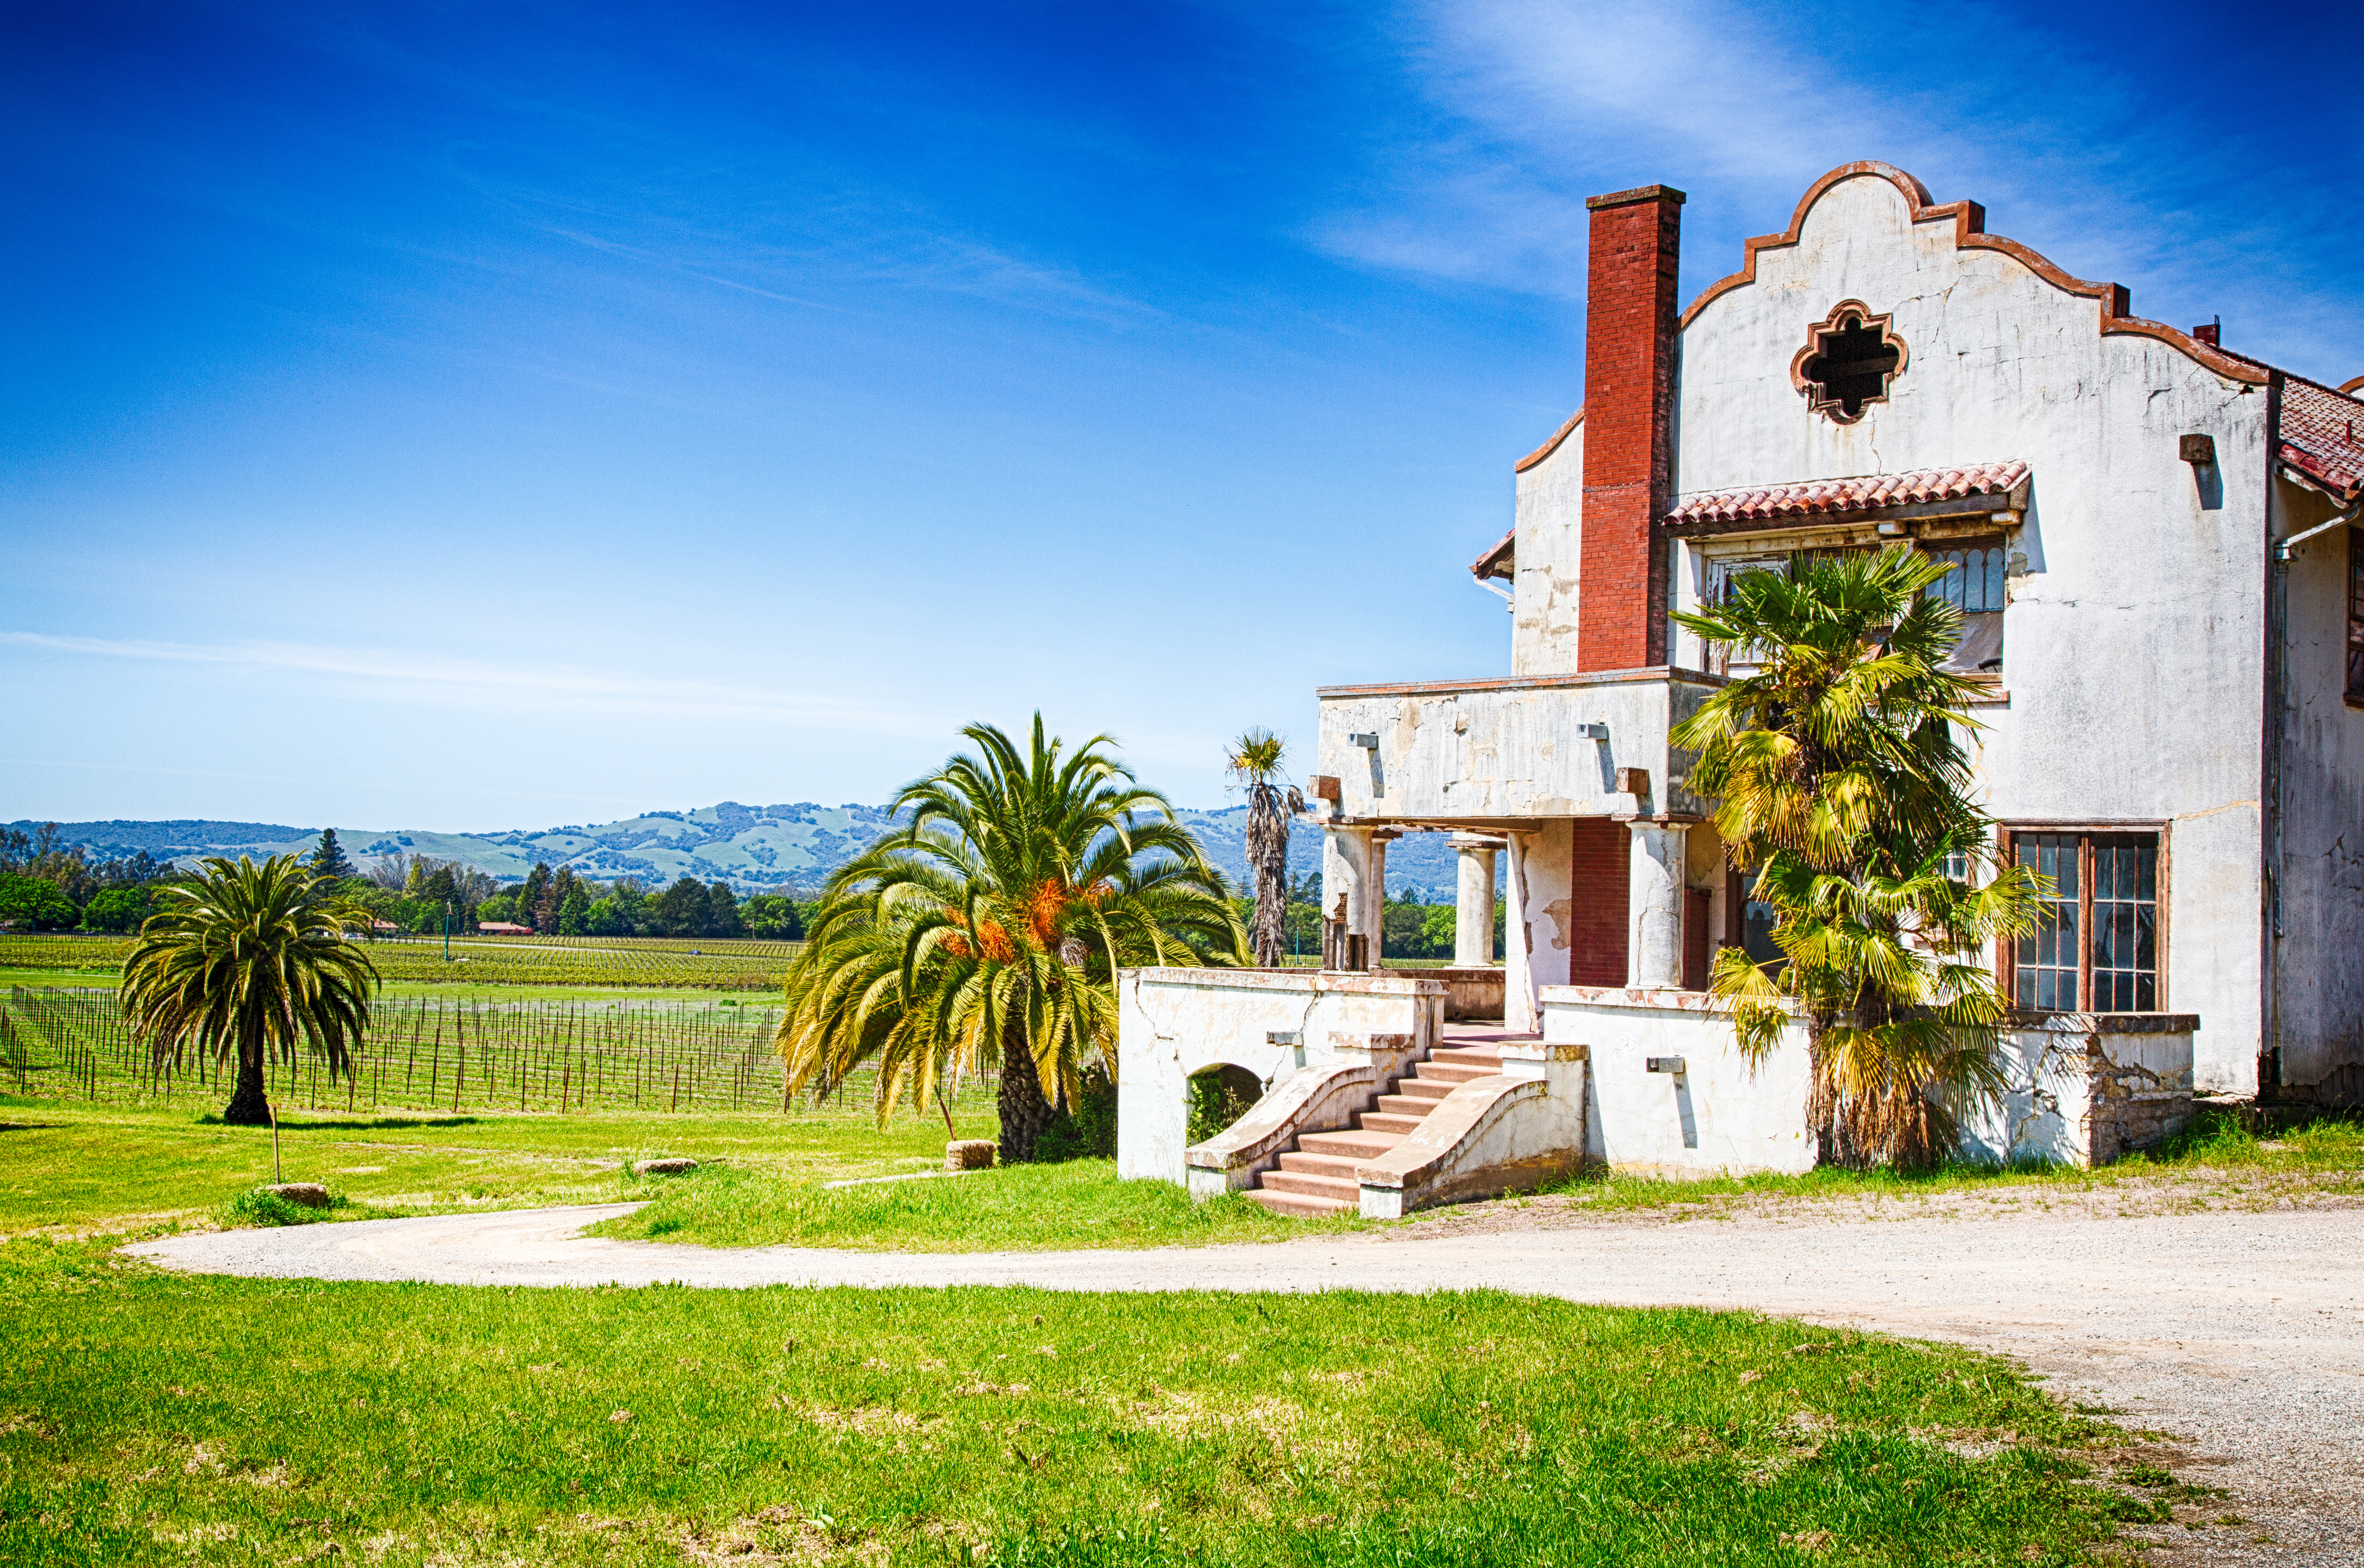 An old mission house on the grounds of a Sonoma County Vineyard. California